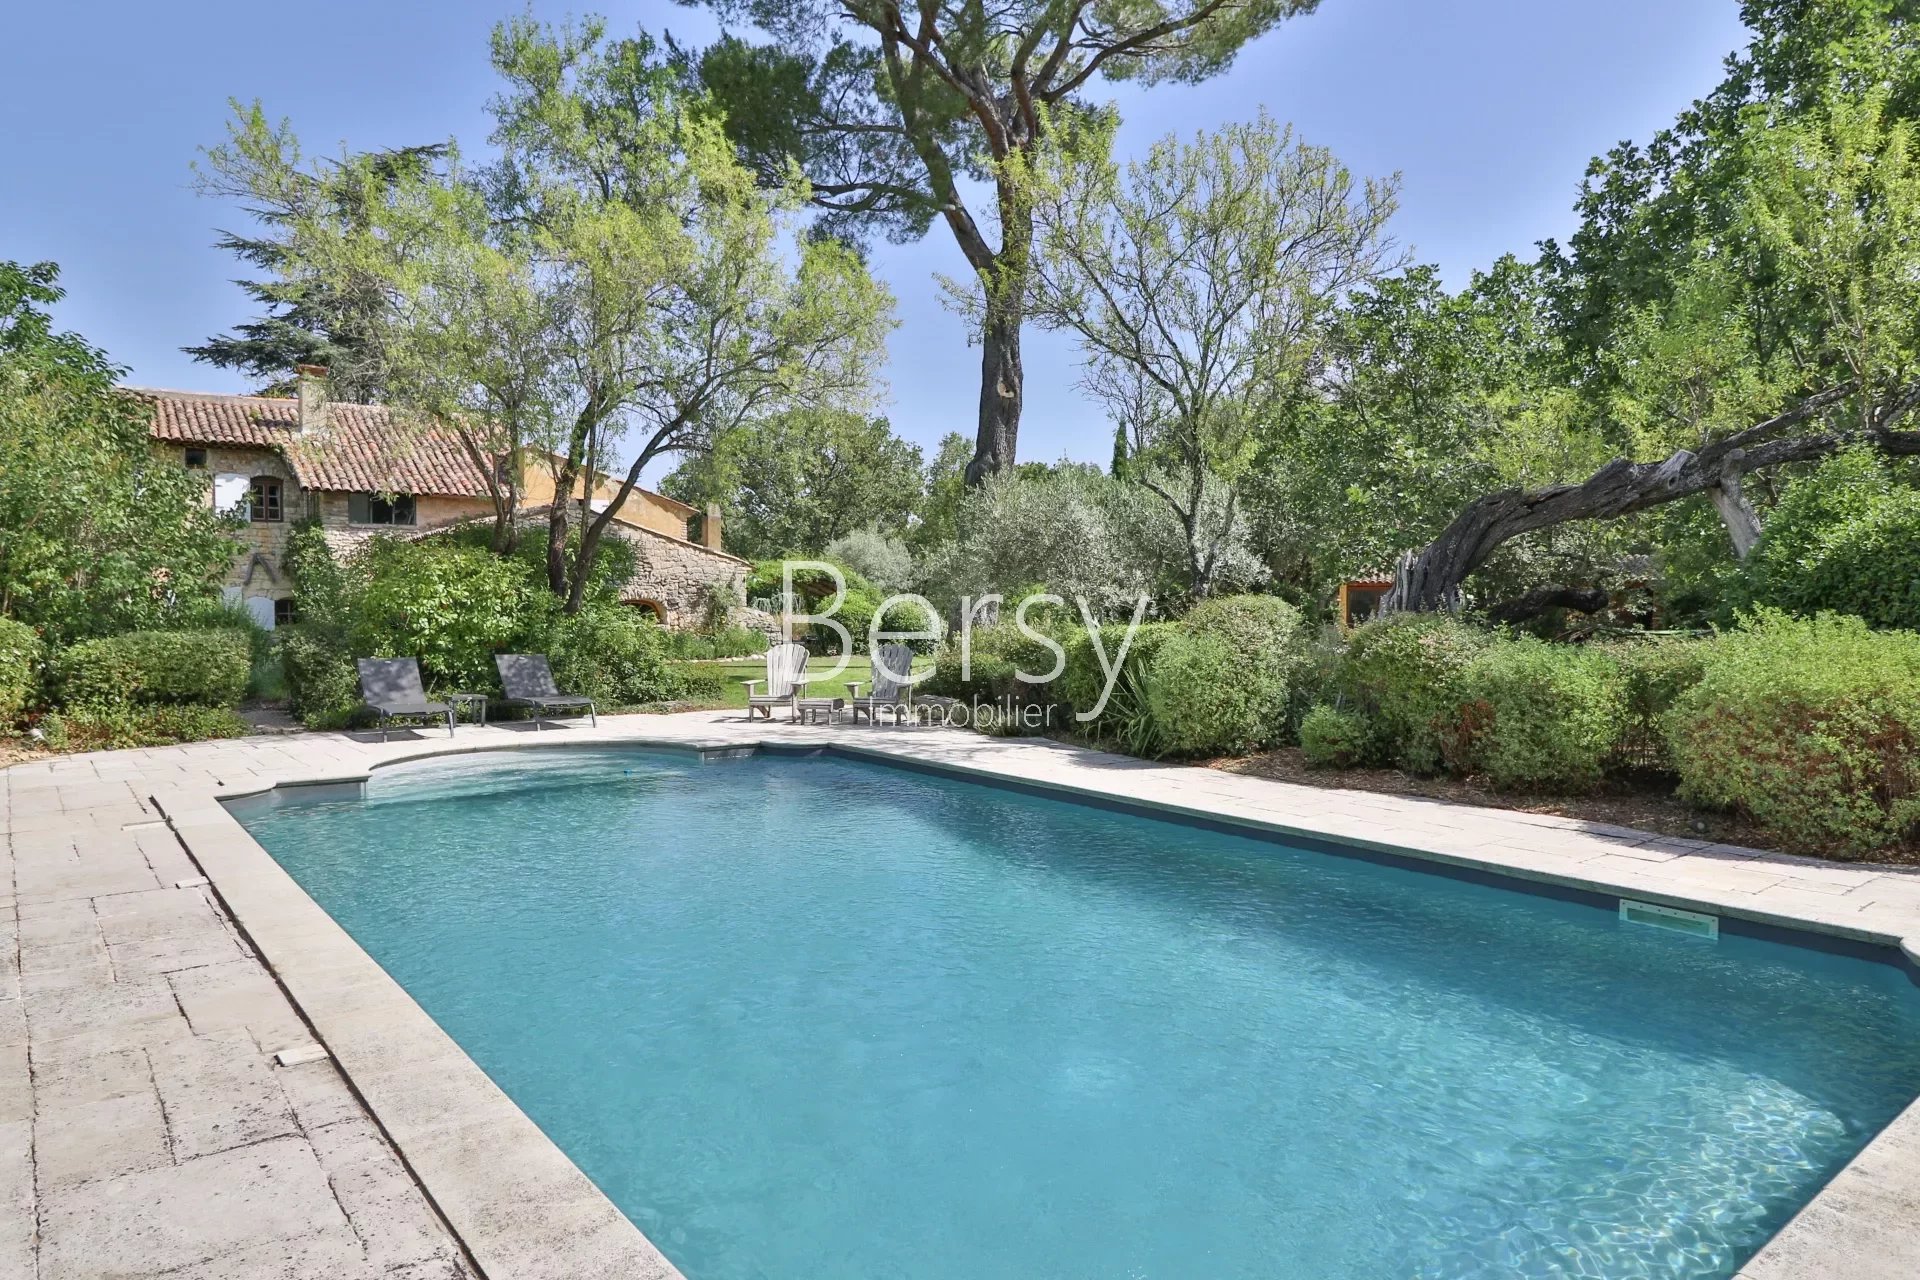 ★ Beautiful Authentic MAS of 1739 ★ BERSY LUXURY PROPERTIES® ★ HEADED POOL + independent Guest House ★